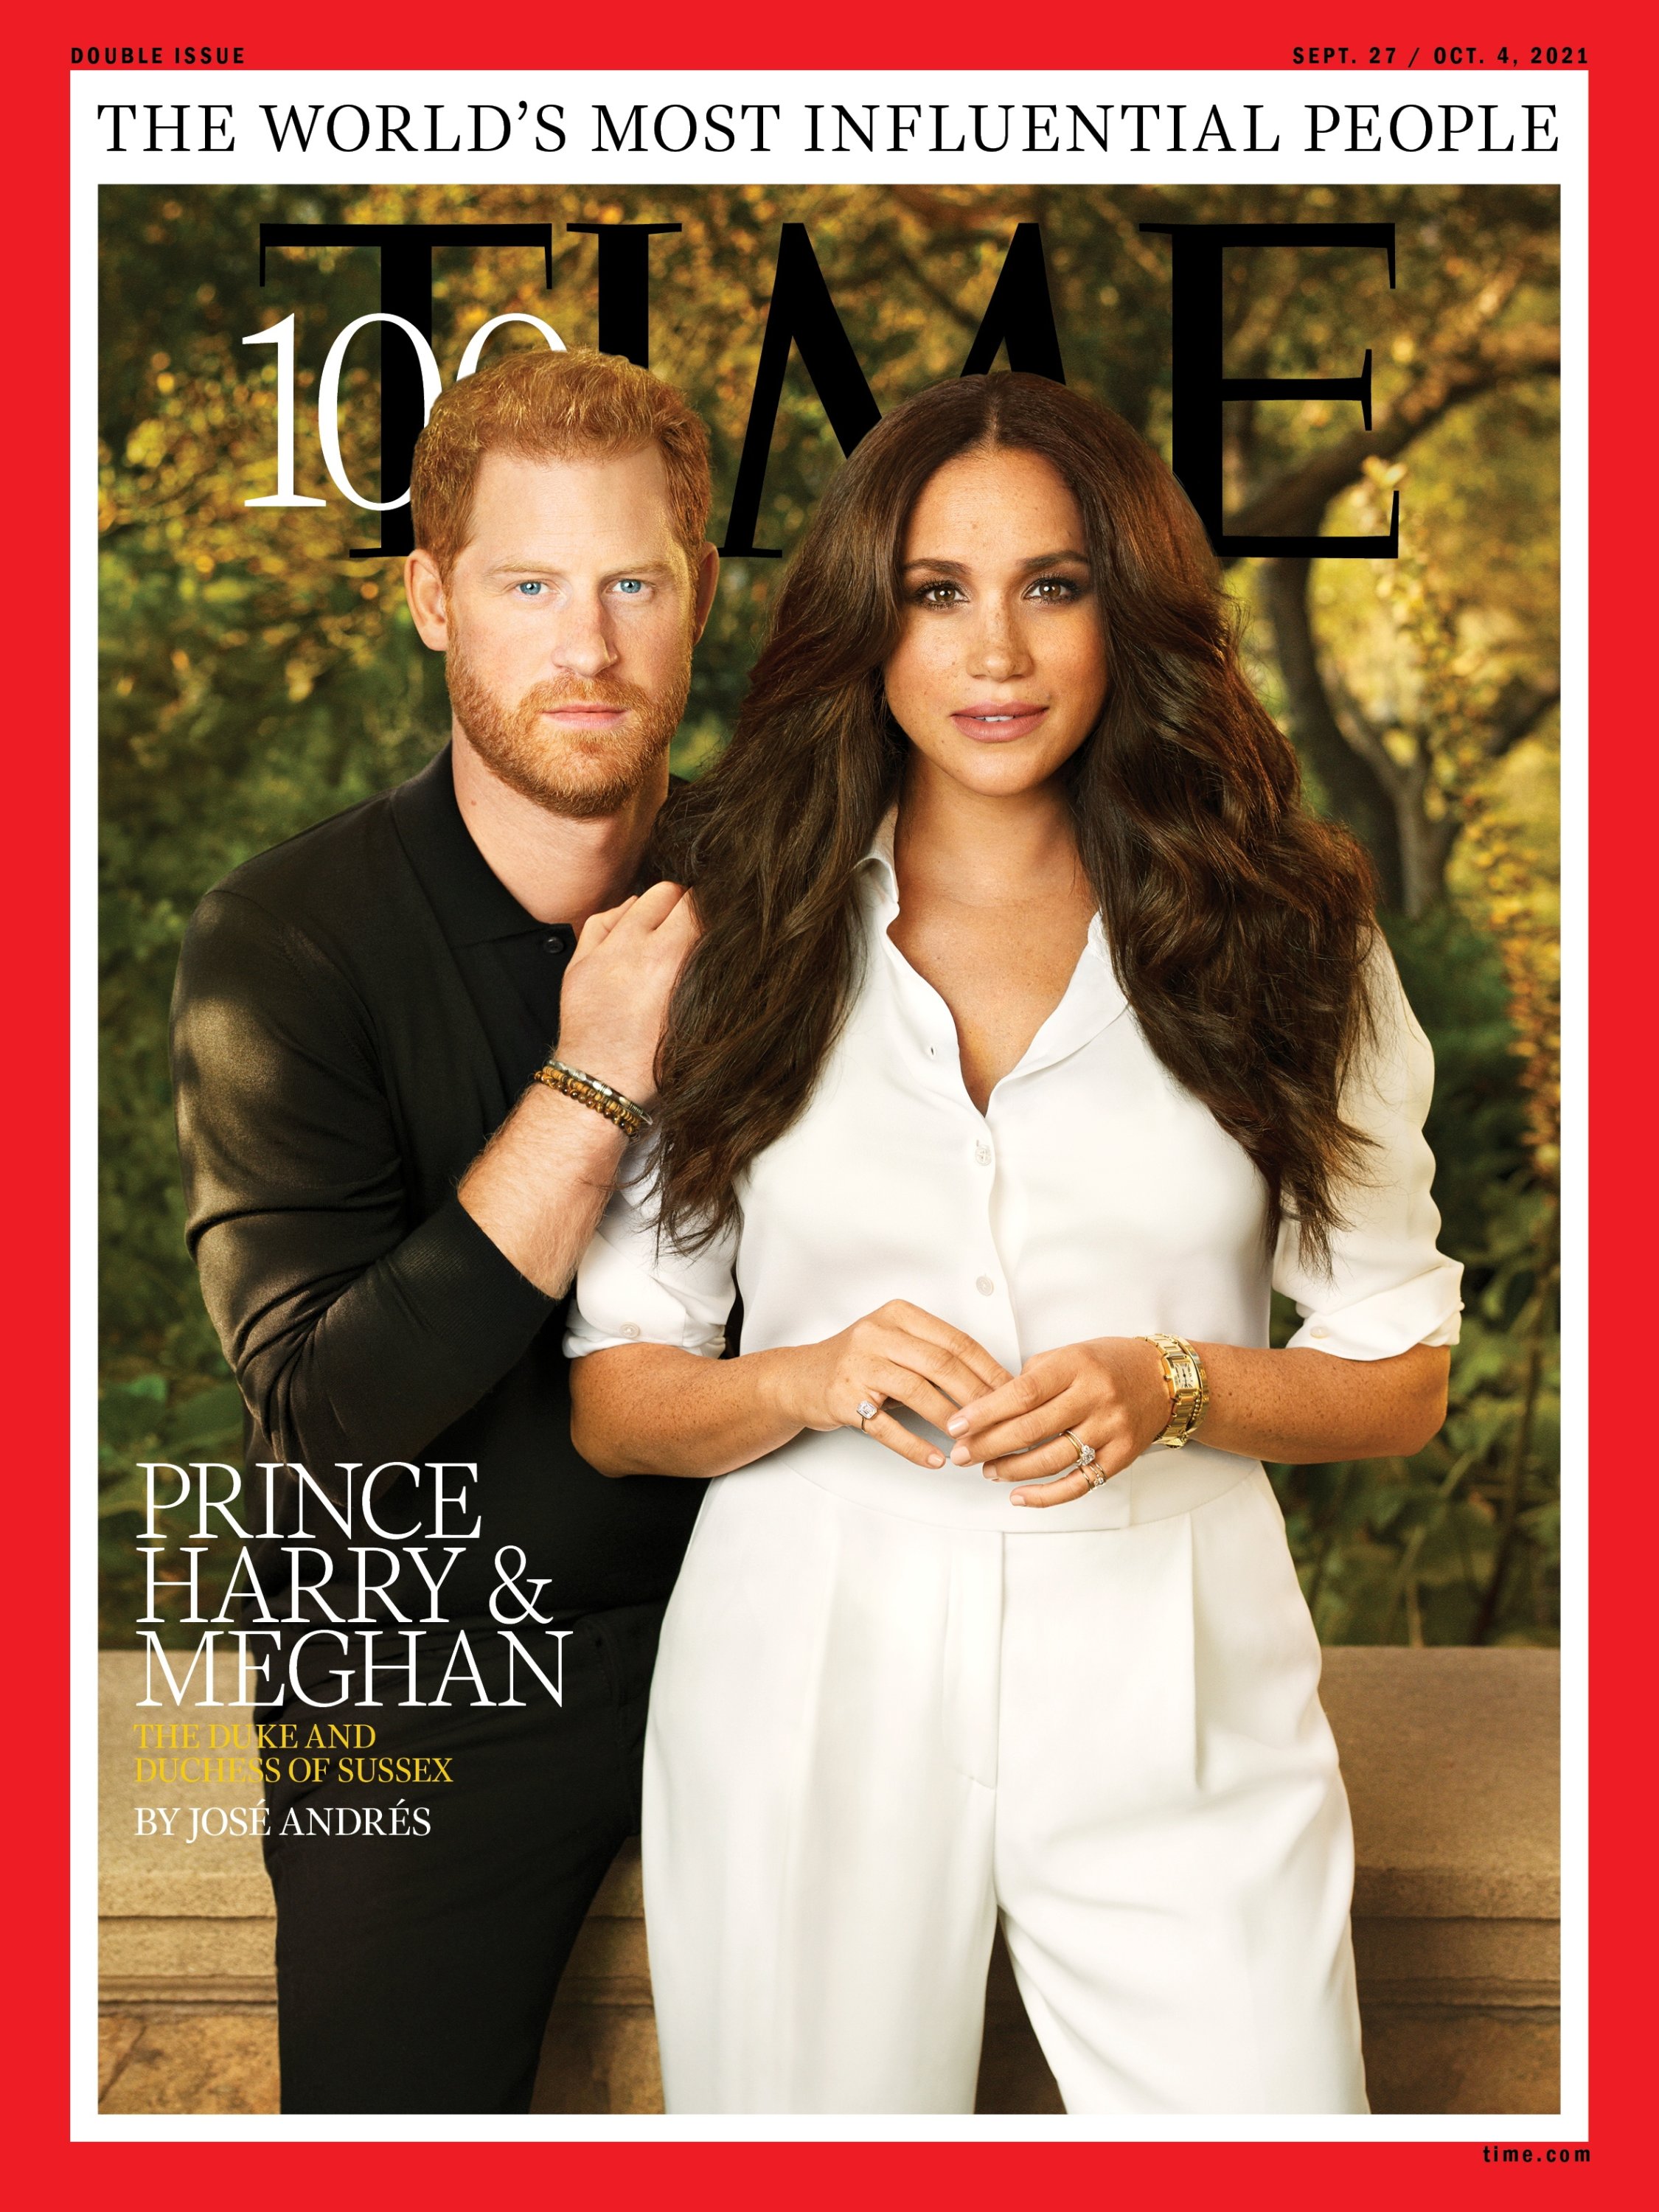 Britain's Prince Harry and Meghan, Duchess of Sussex, appear on the cover of Time magazine's 100 most influential people in the world edition in this handout photo released to Reuters on Sept. 15, 2021. (Pari Dukovic for TIME/Handout via Reuters)